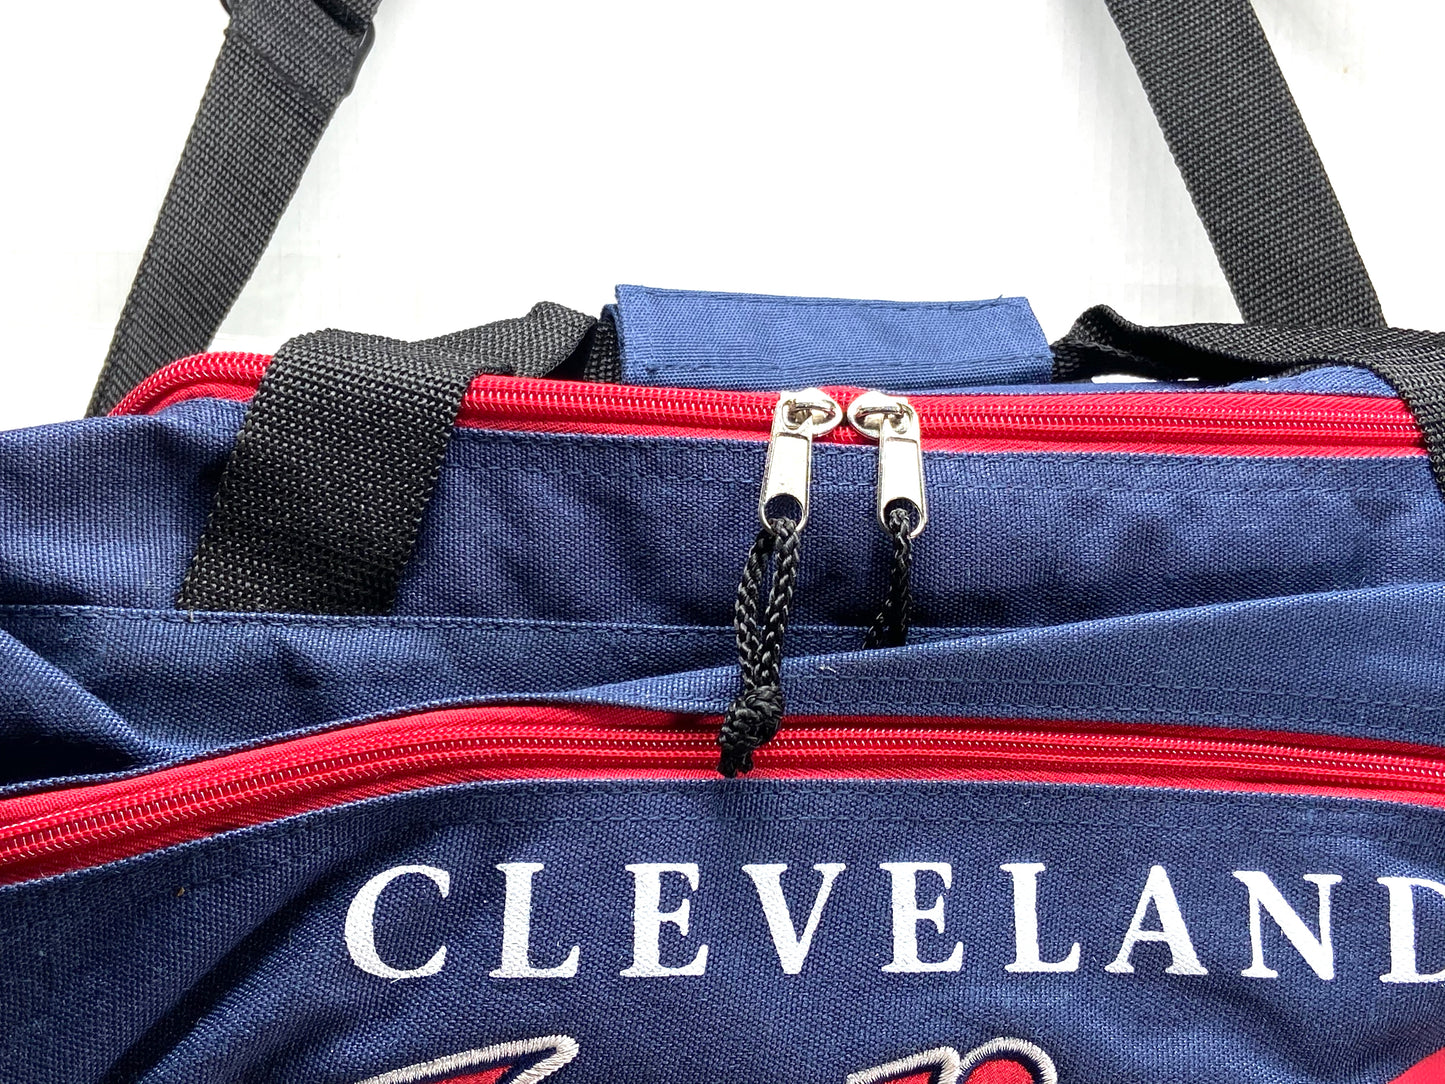 Cleveland Indians Vintage MLB Duffel Bag By (Undetermined)